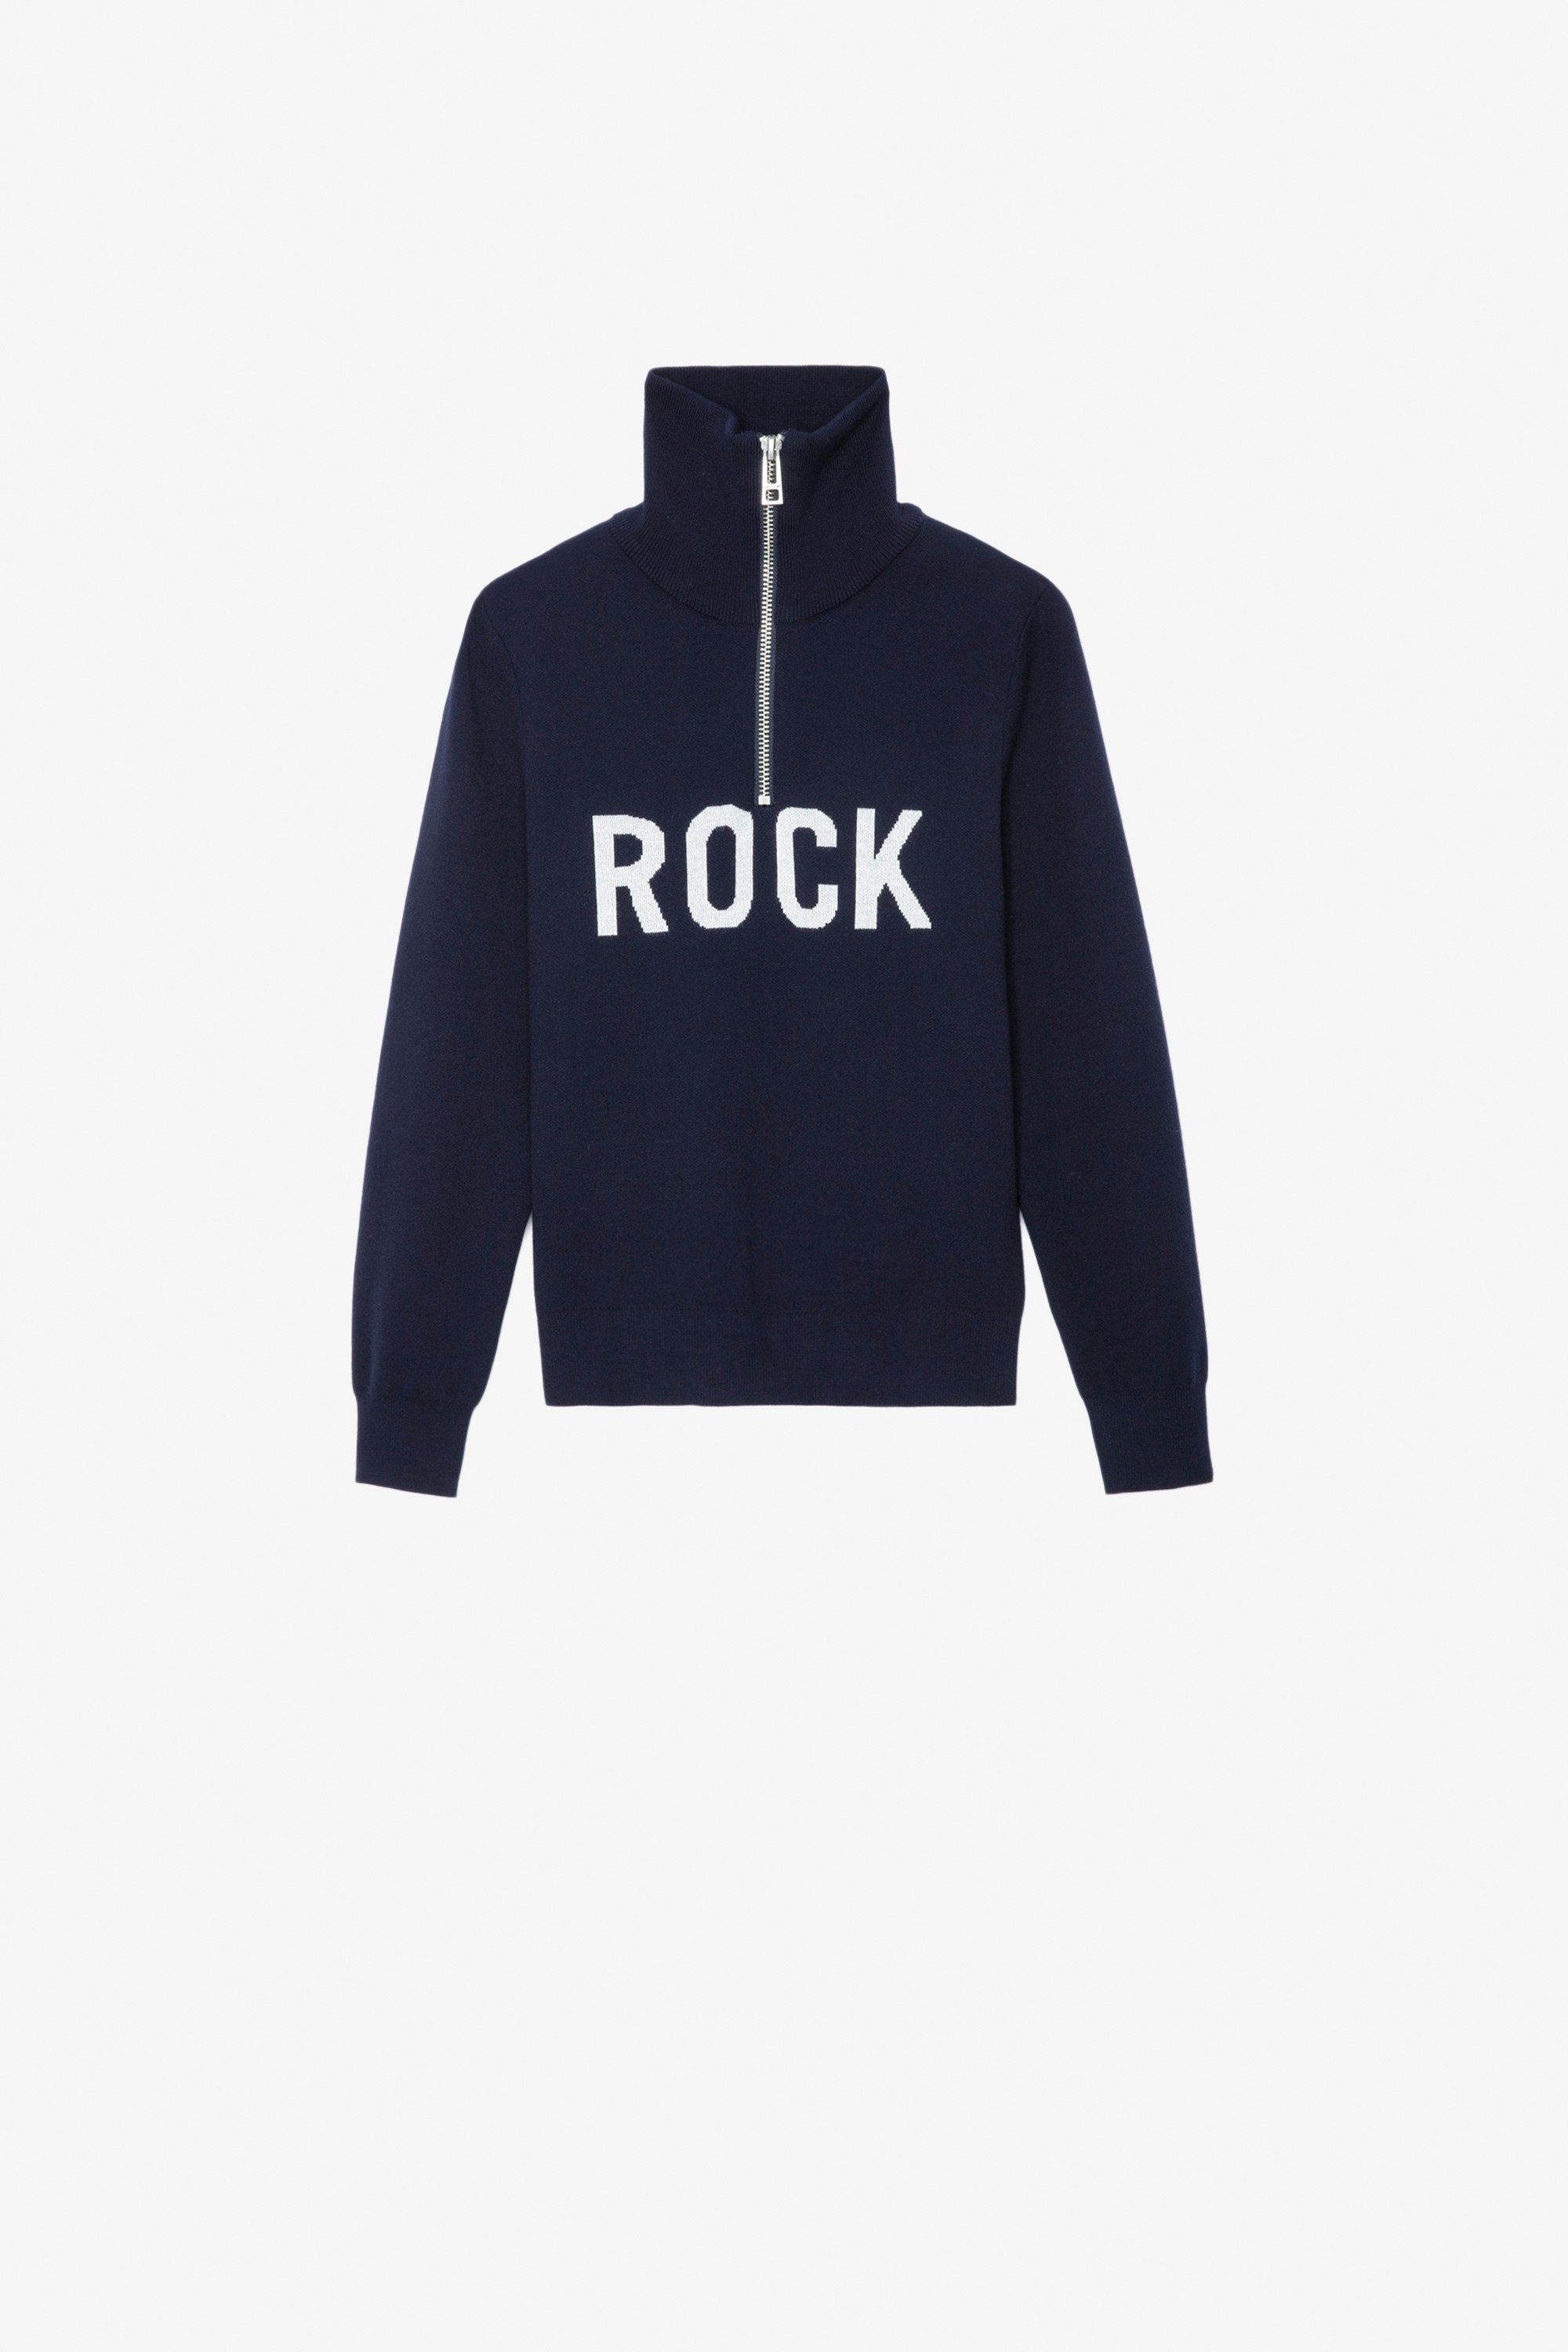 Tim Boys’ Sweater  - Boys’ navy blue knit sweater with zip neck and “Rock” slogan.